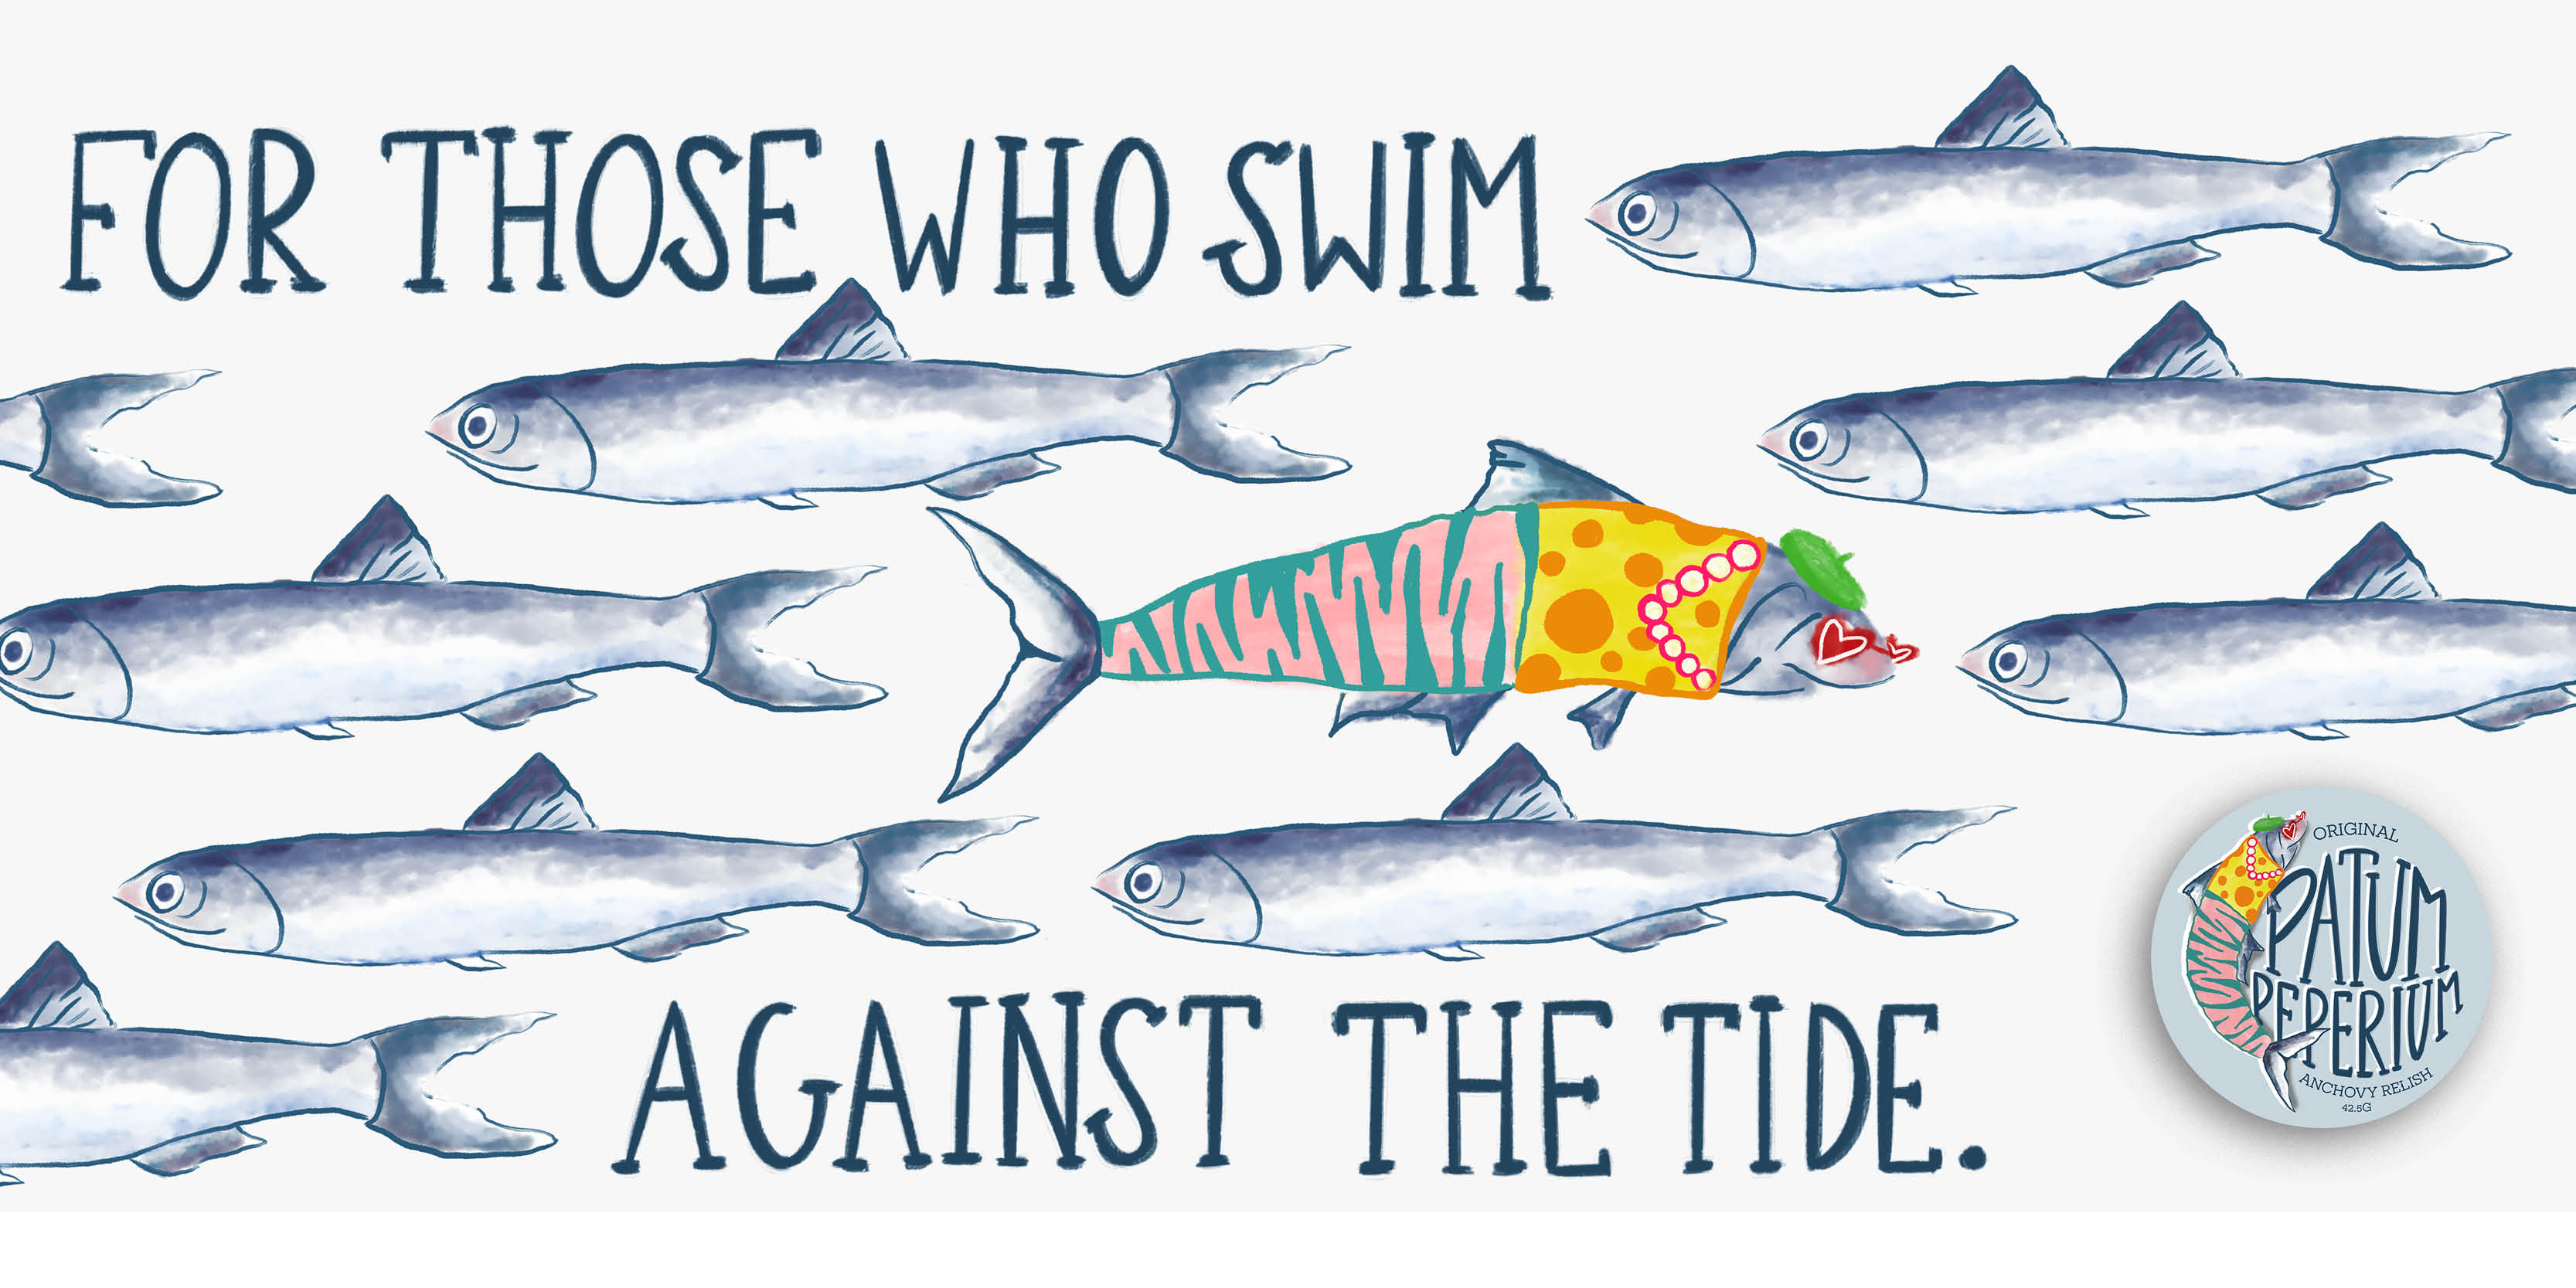 BA Graphic Design work by Tiarnie Stammers showing advertisement for Patum Peperium relishes. The image shows a boldly dressed fish swimming towards other fish and says, 'For those who swim against the tide'